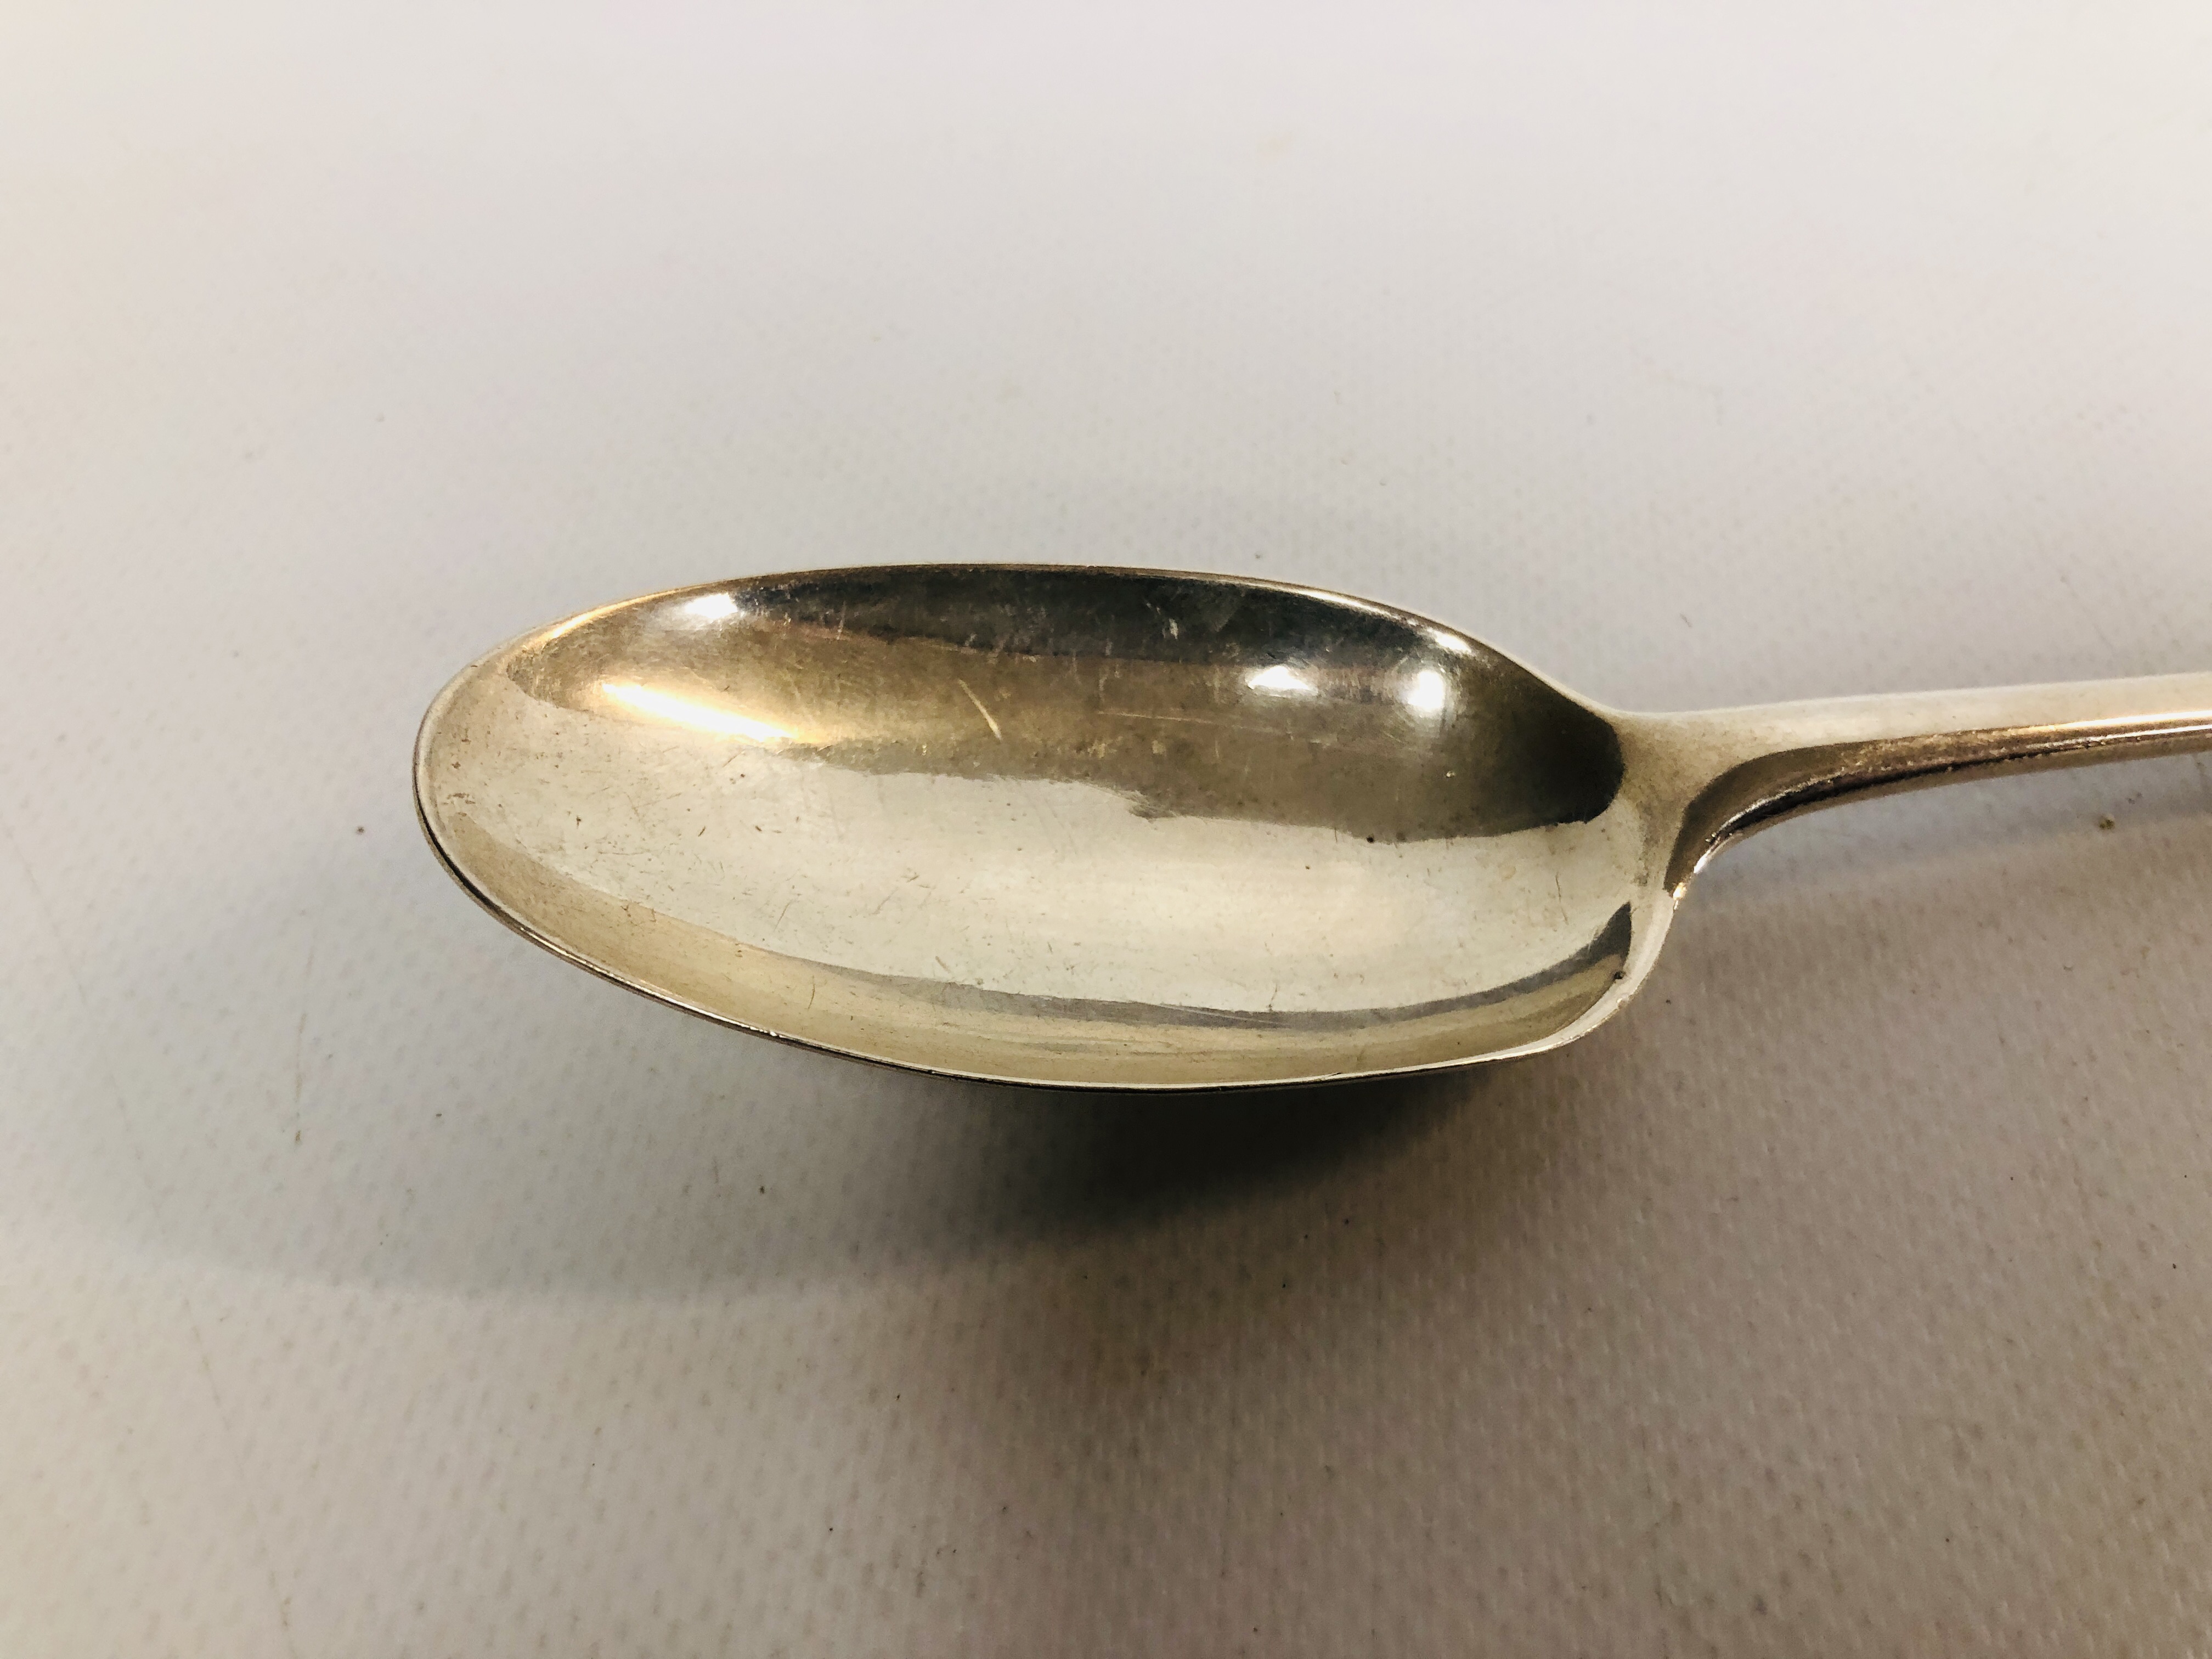 A GEORGE III SILVER HANOVERIAN PATTERN SERVING SPOON, BY JOHN HUGH LE SAGE, - Image 2 of 6